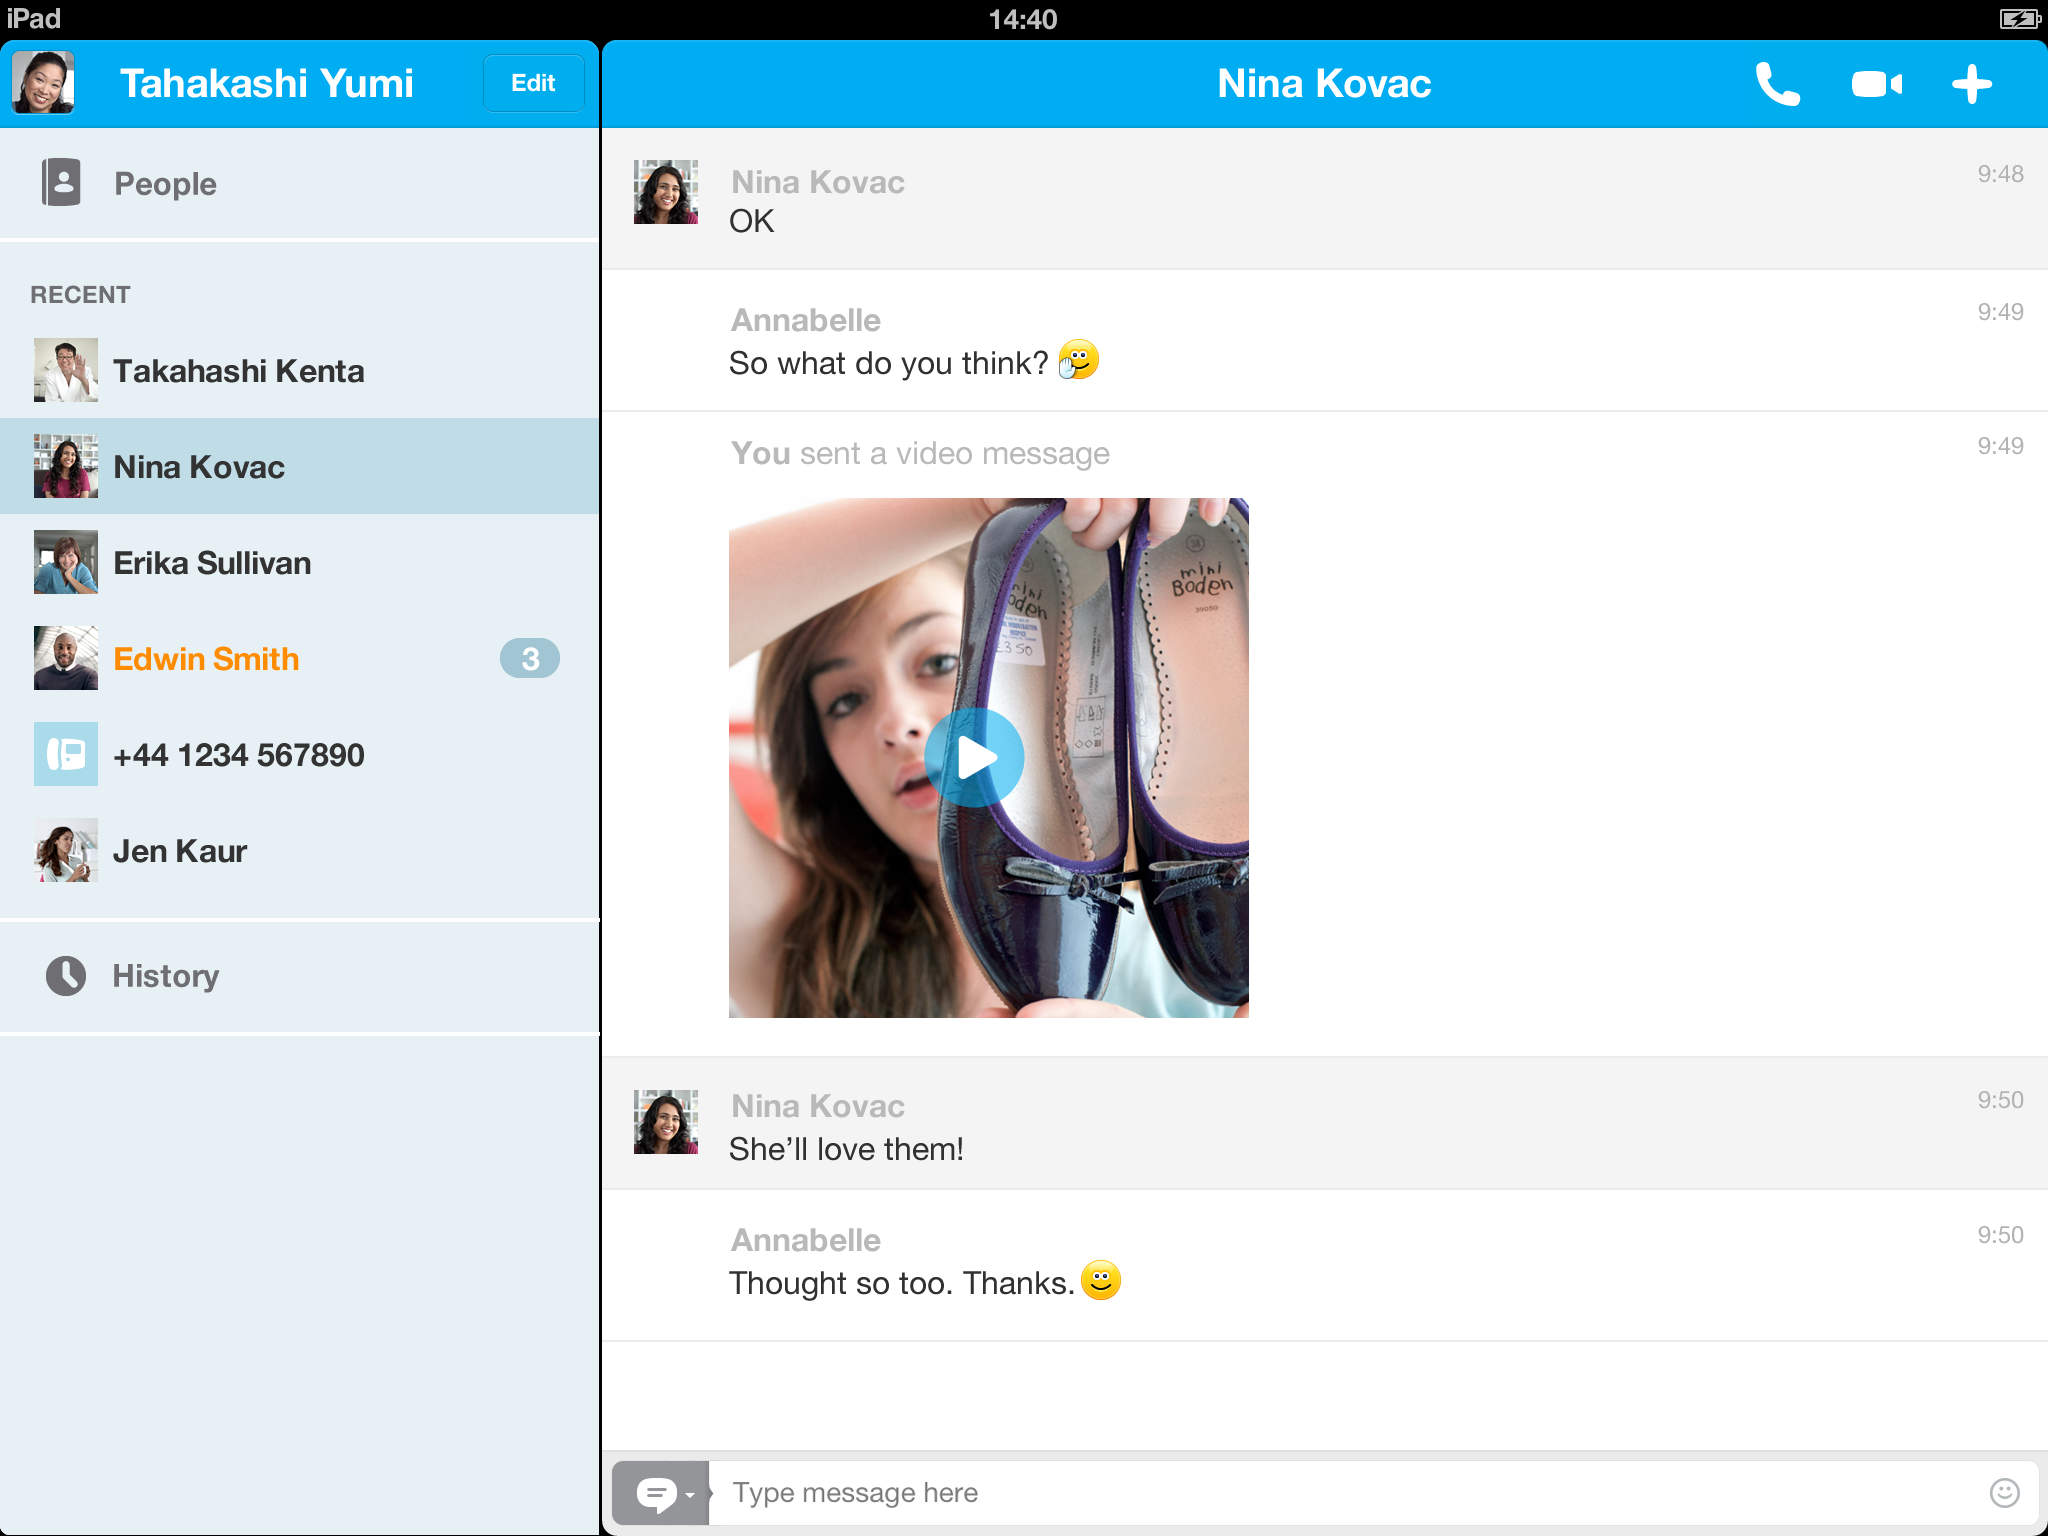 Skype for iOS Brings Ability to Join Group Voice Calls, Improved Video and Voice Call Quality, More